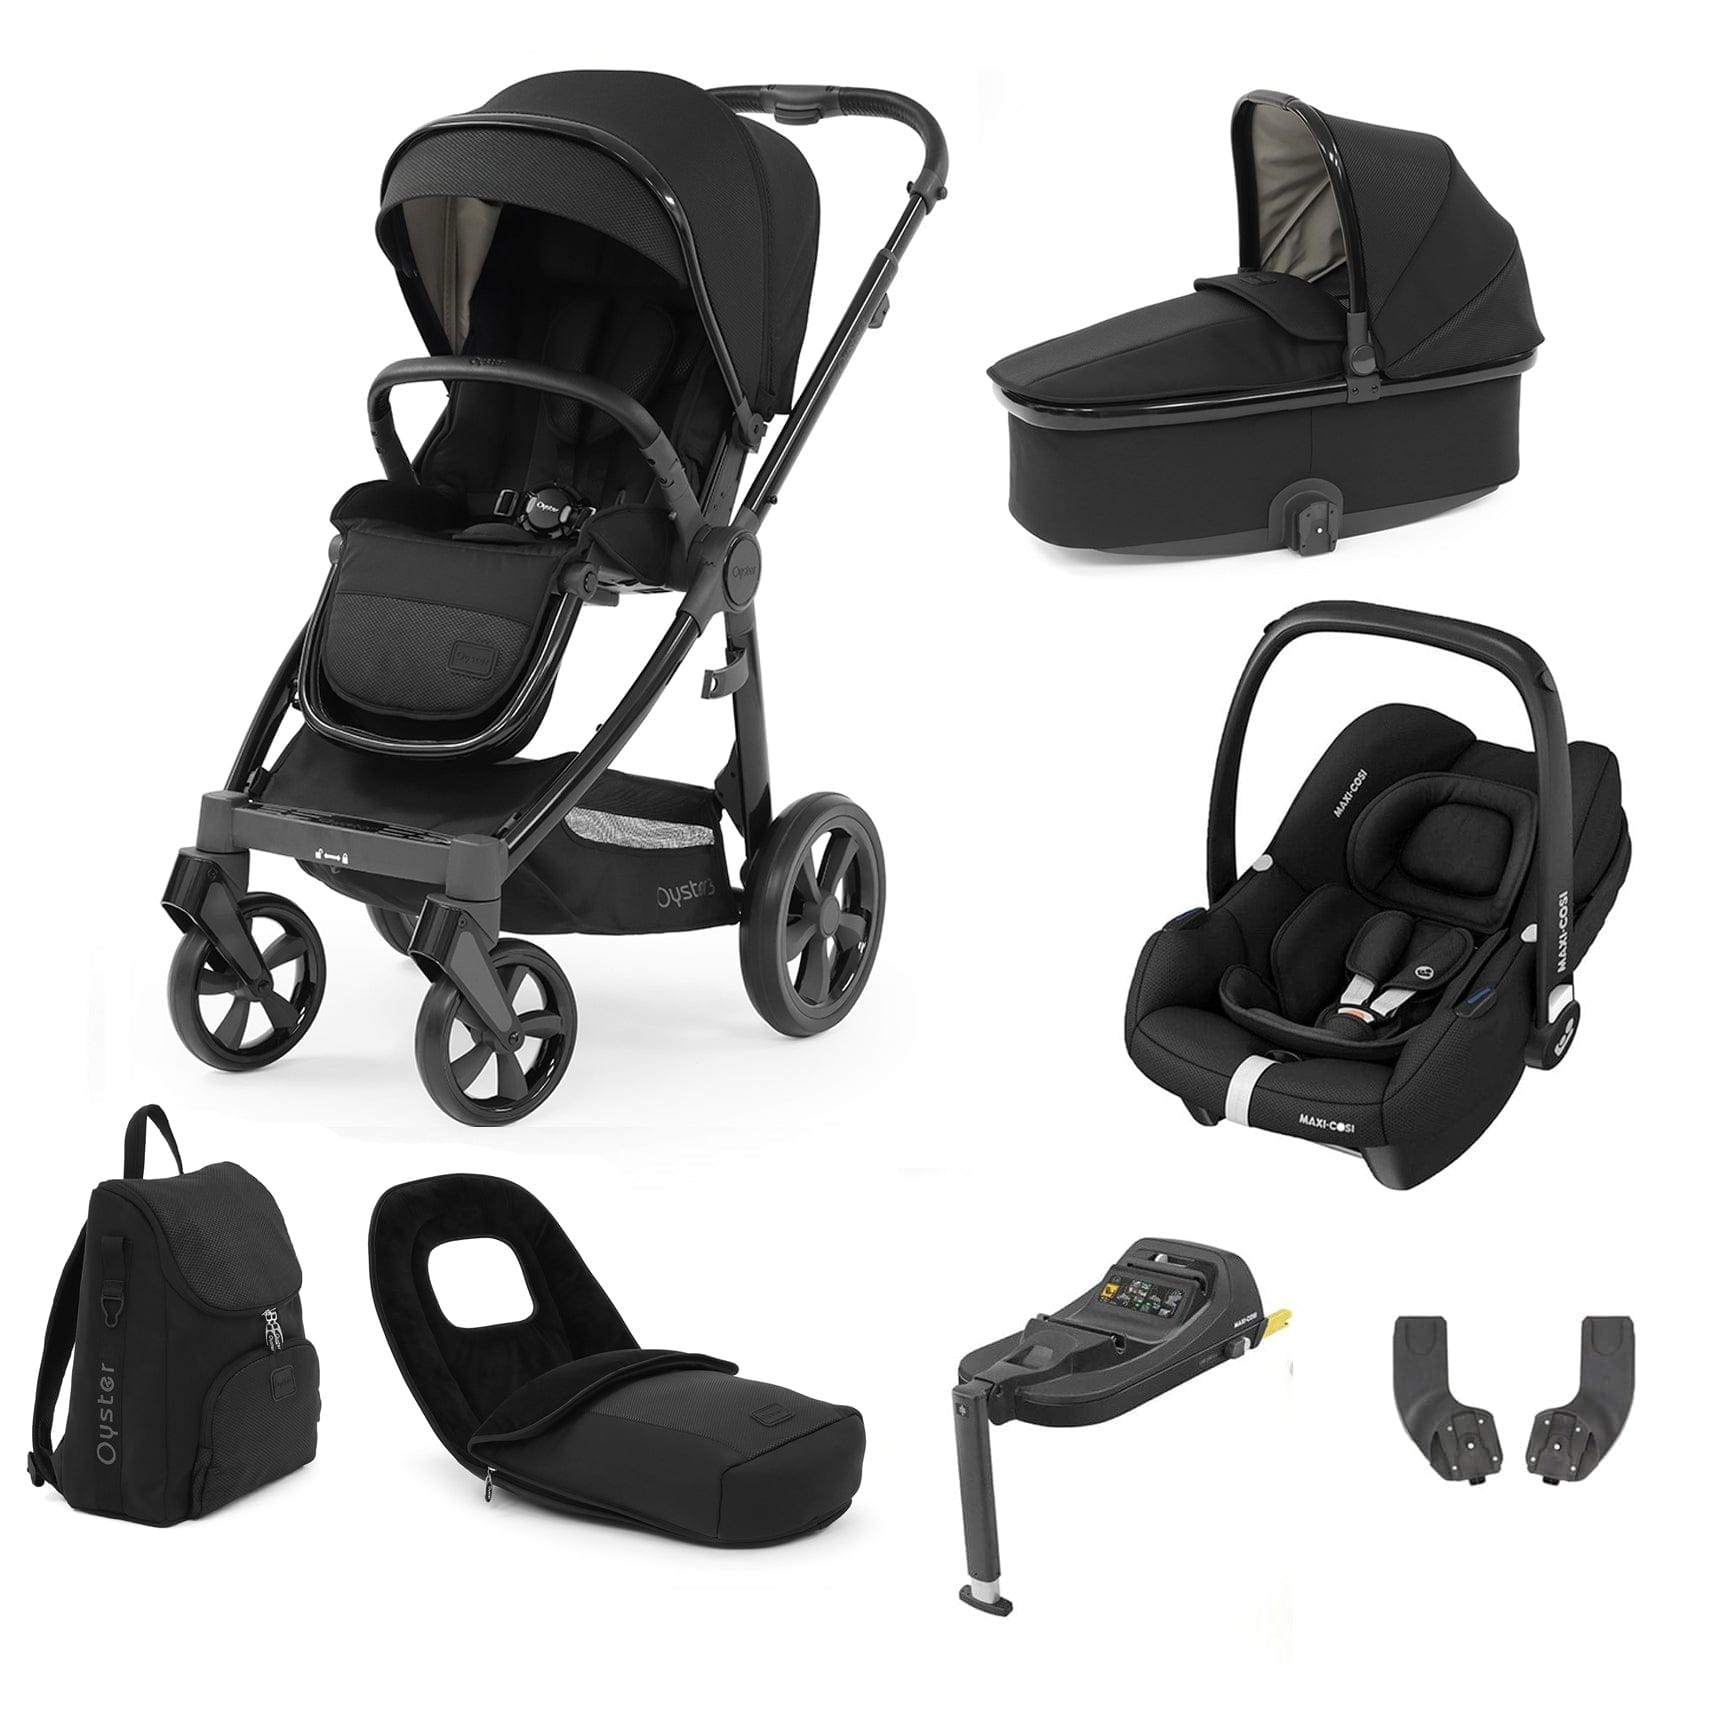 Babystyle Oyster 3 Luxury 7 Piece with Car Seat Bundle in Pixel Travel Systems 14815-PXL 5060711565668